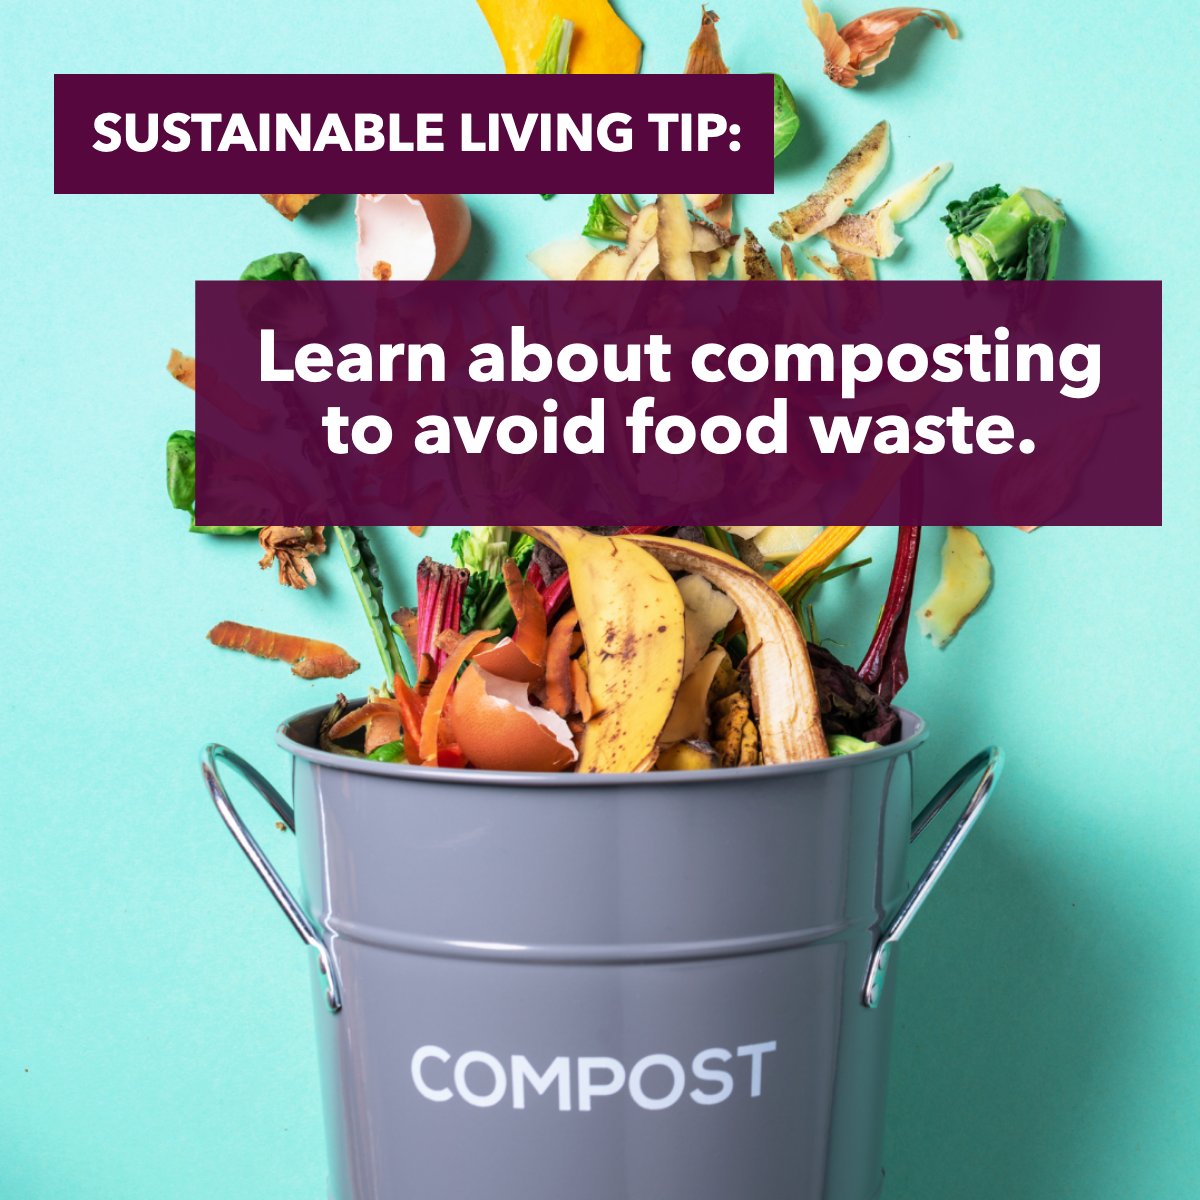 Have you tried composting? Tell me your experience in the comments! 💭

#sustainablelifestyle #sustainable #sustainablity #composting
 #TroySage #Realtor #HomesForSale #RealEstate #RealEstateMarket #realestateinsider #RealEstateMarket